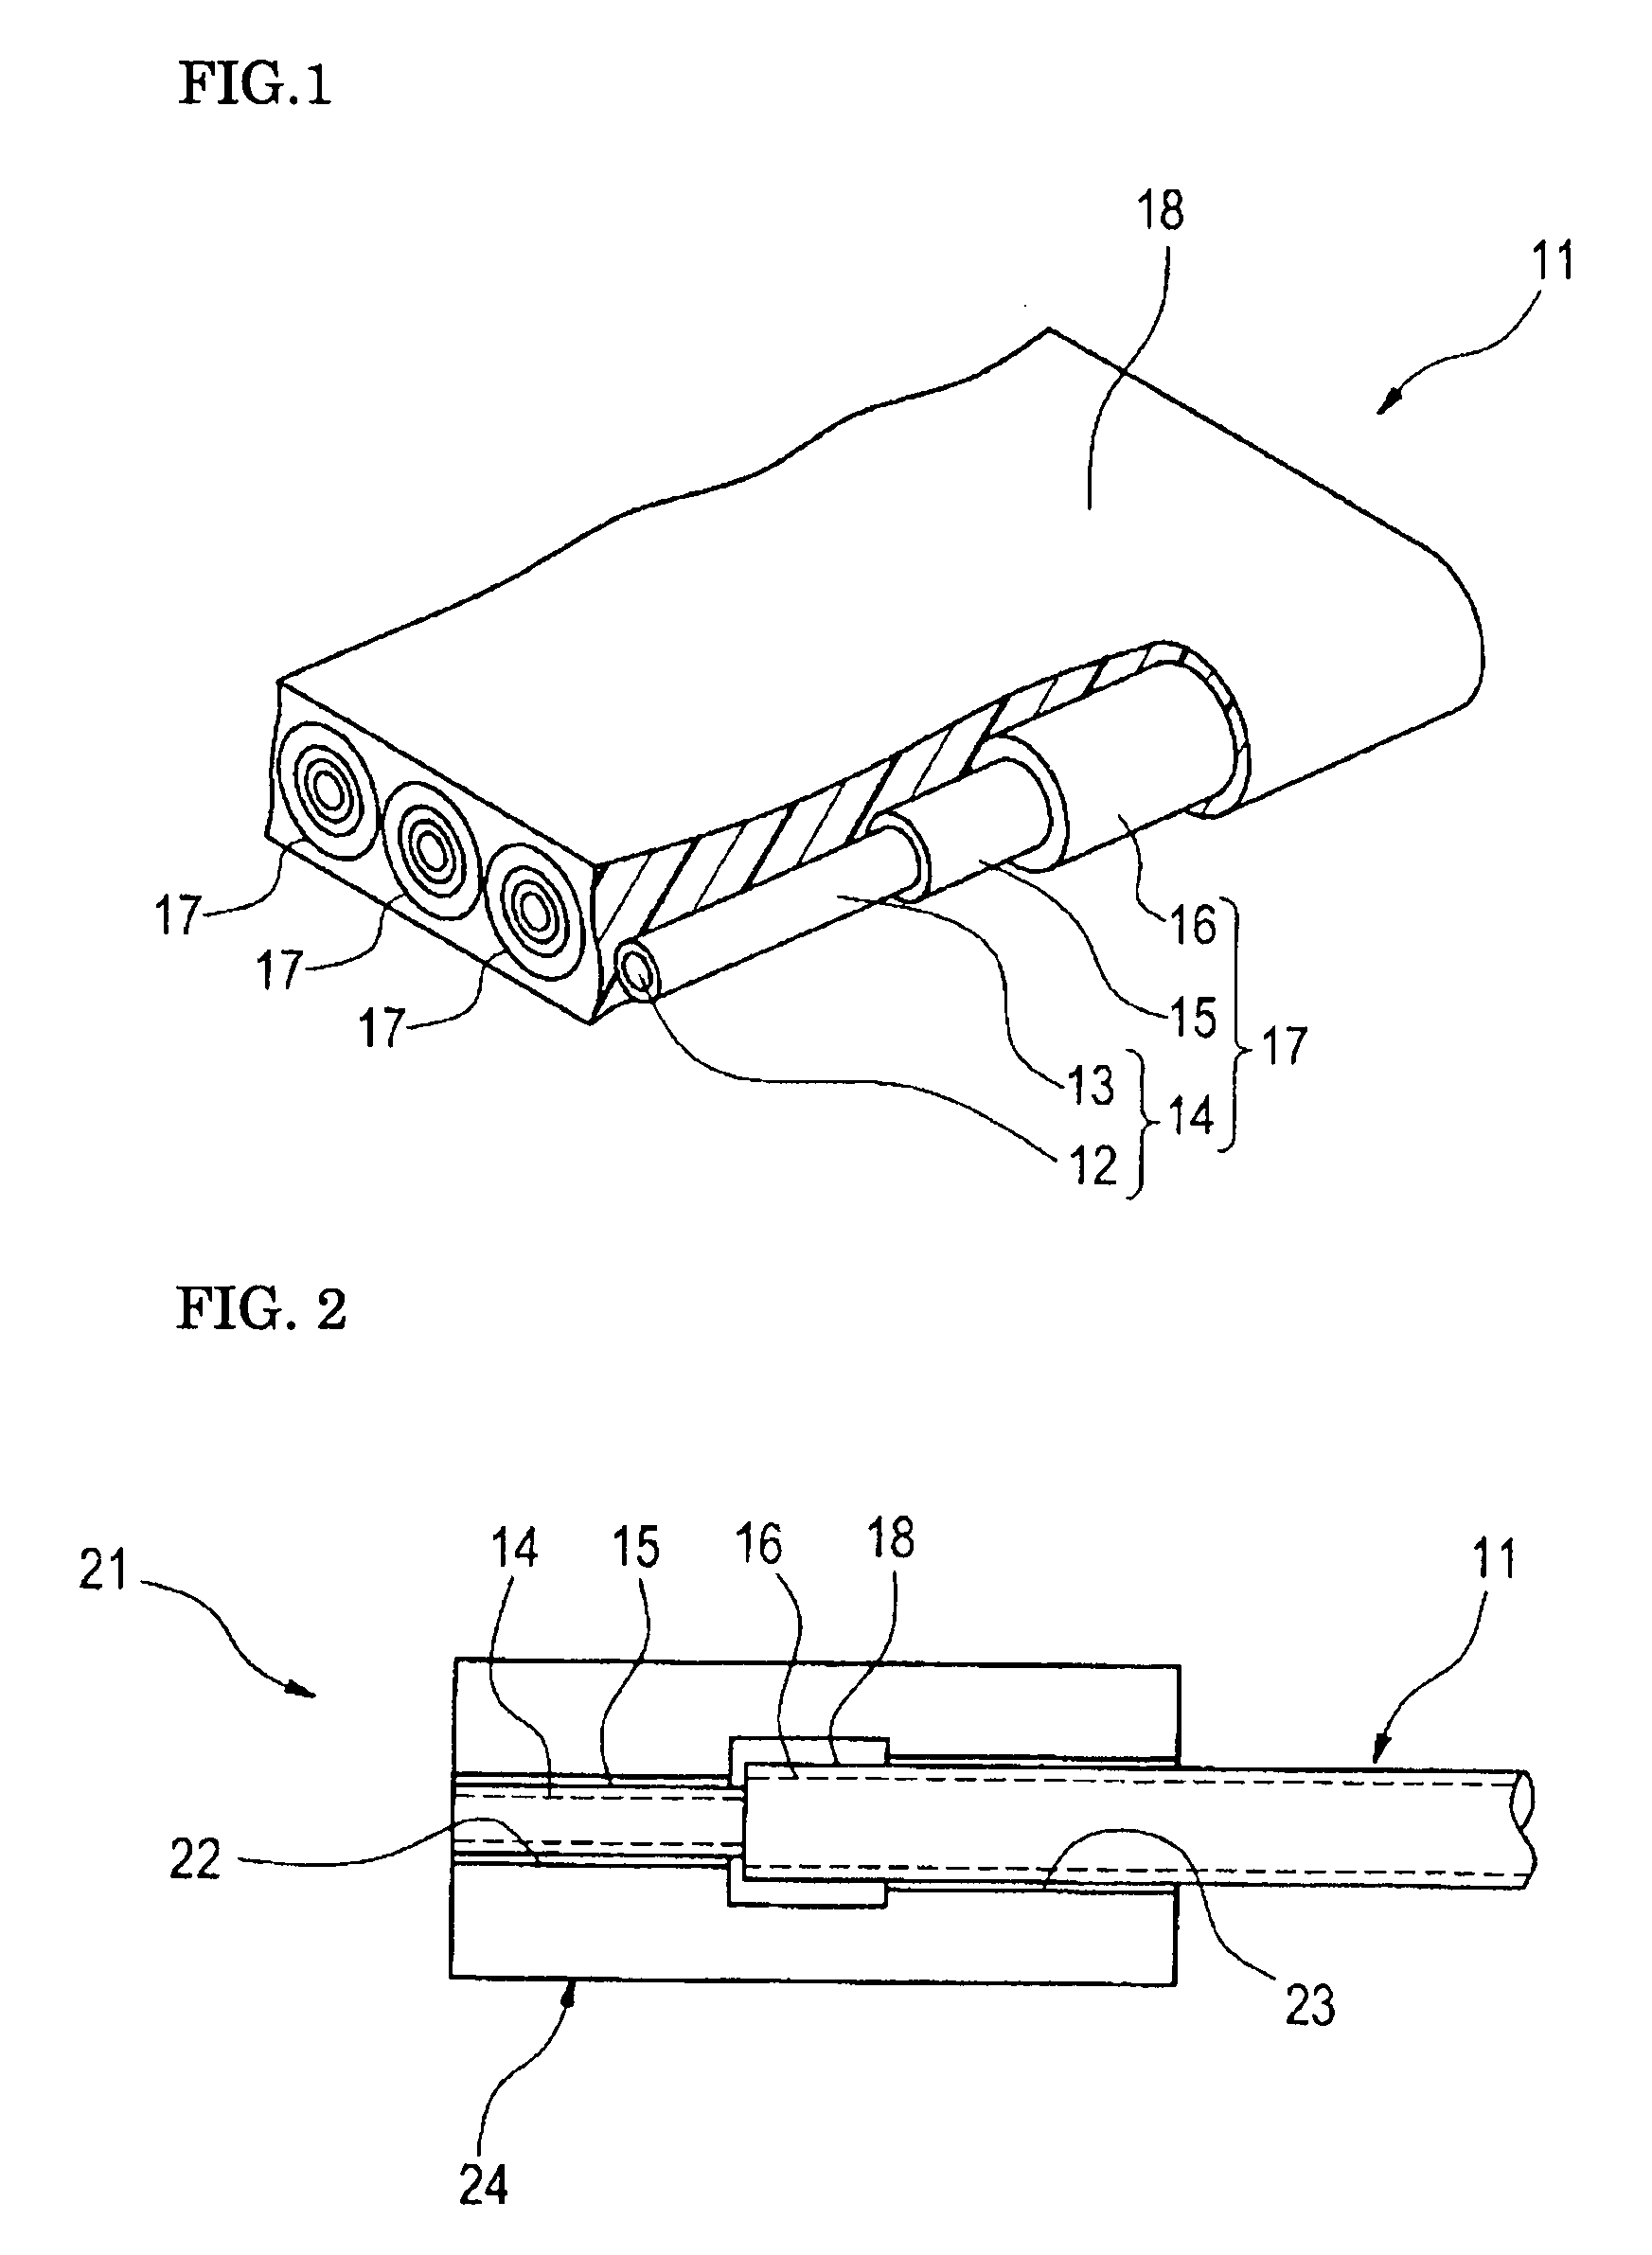 Fiber ribbon and fiber ribbon attached to connector for wiring in equipment